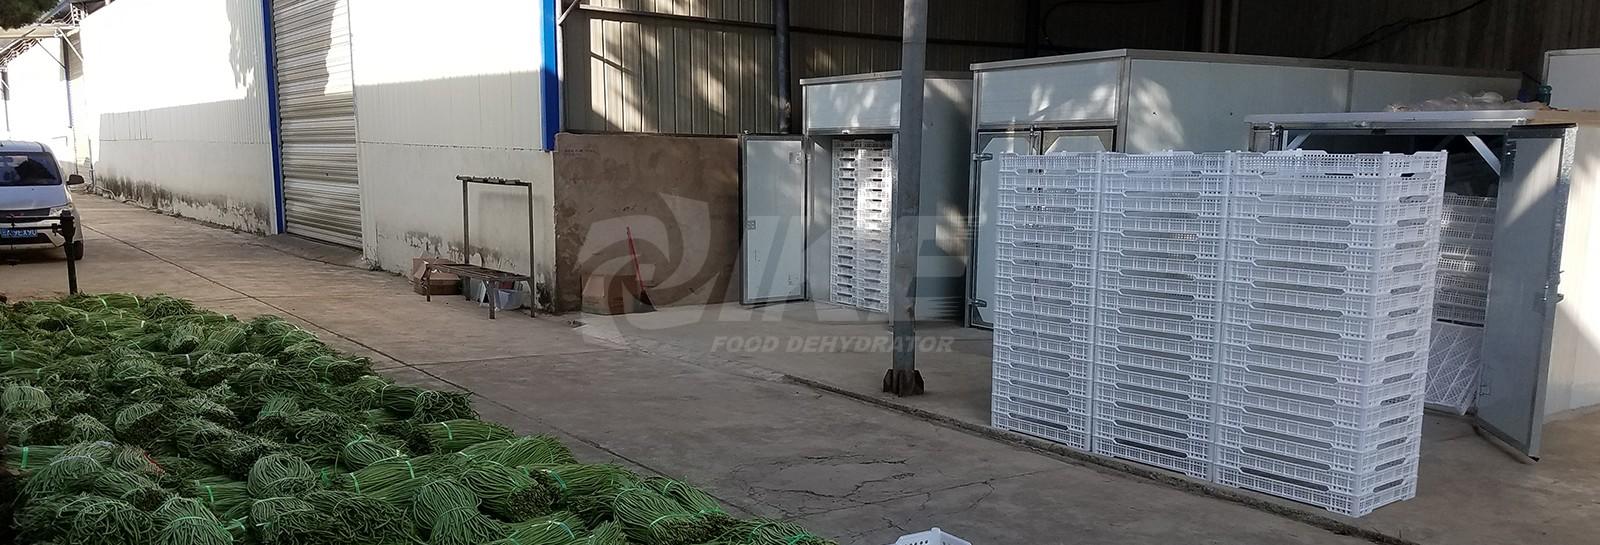 IKE-Find Wrh-1200a Middle Temperature Industrial Large Food Dehydrator Machine